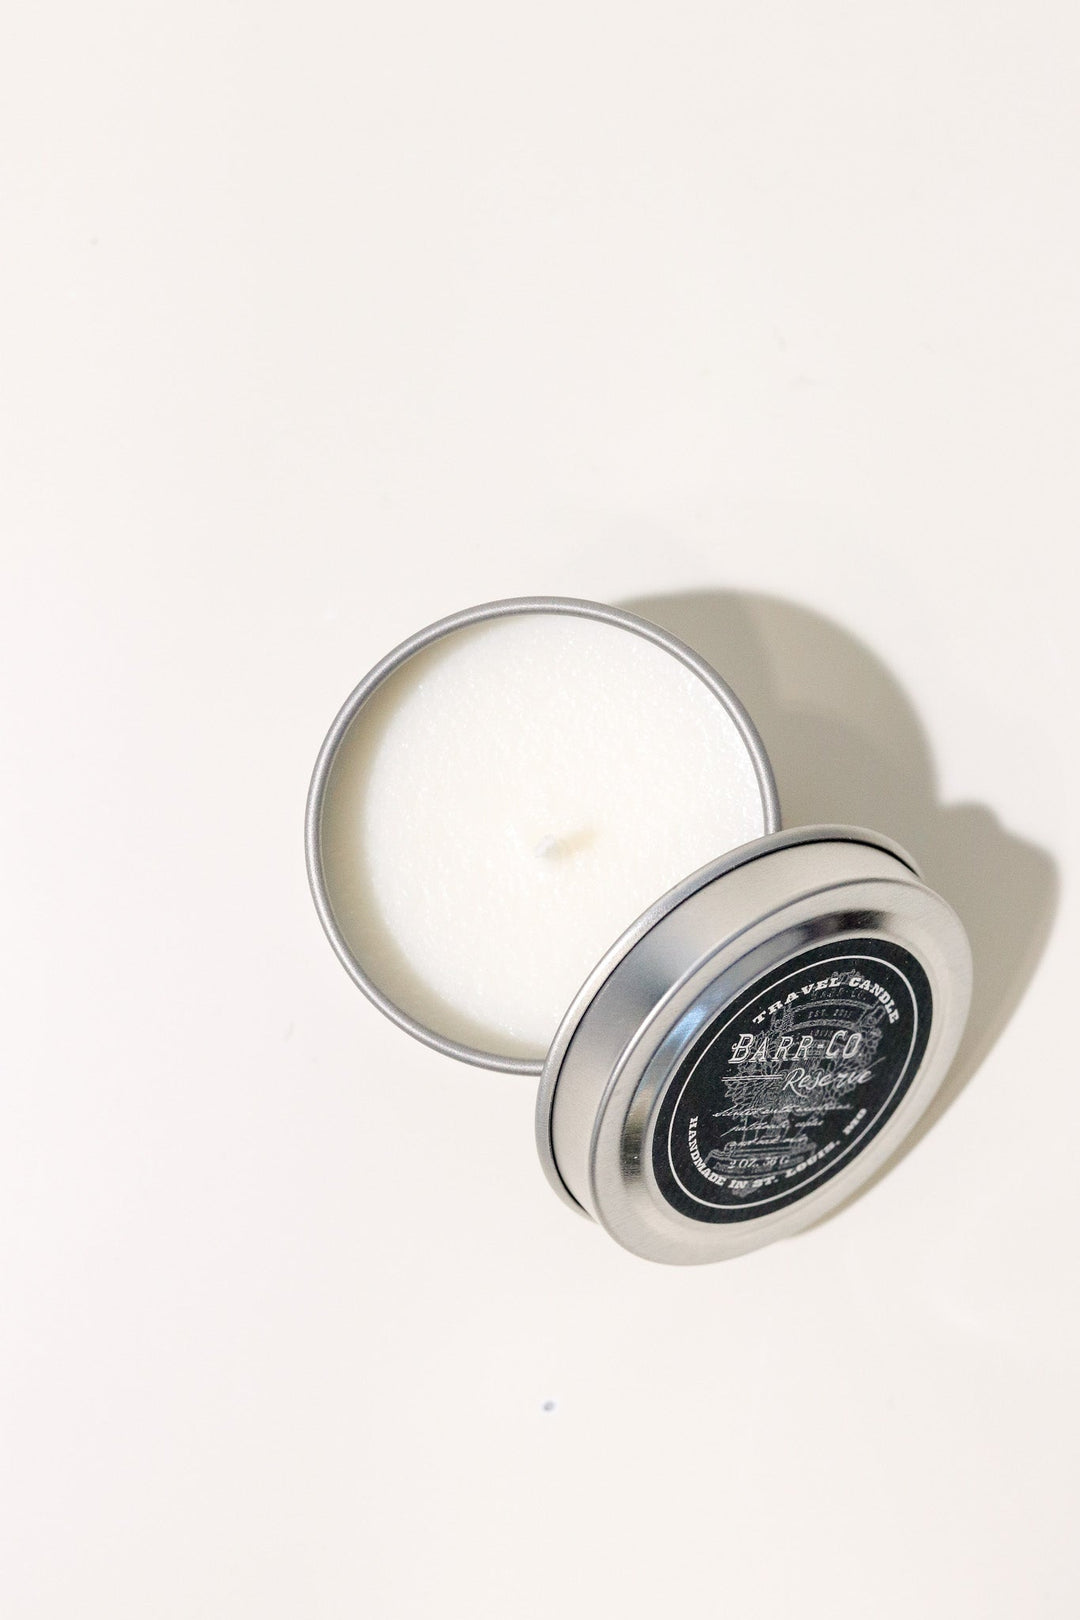 Reserve Petite Candle - Heyday